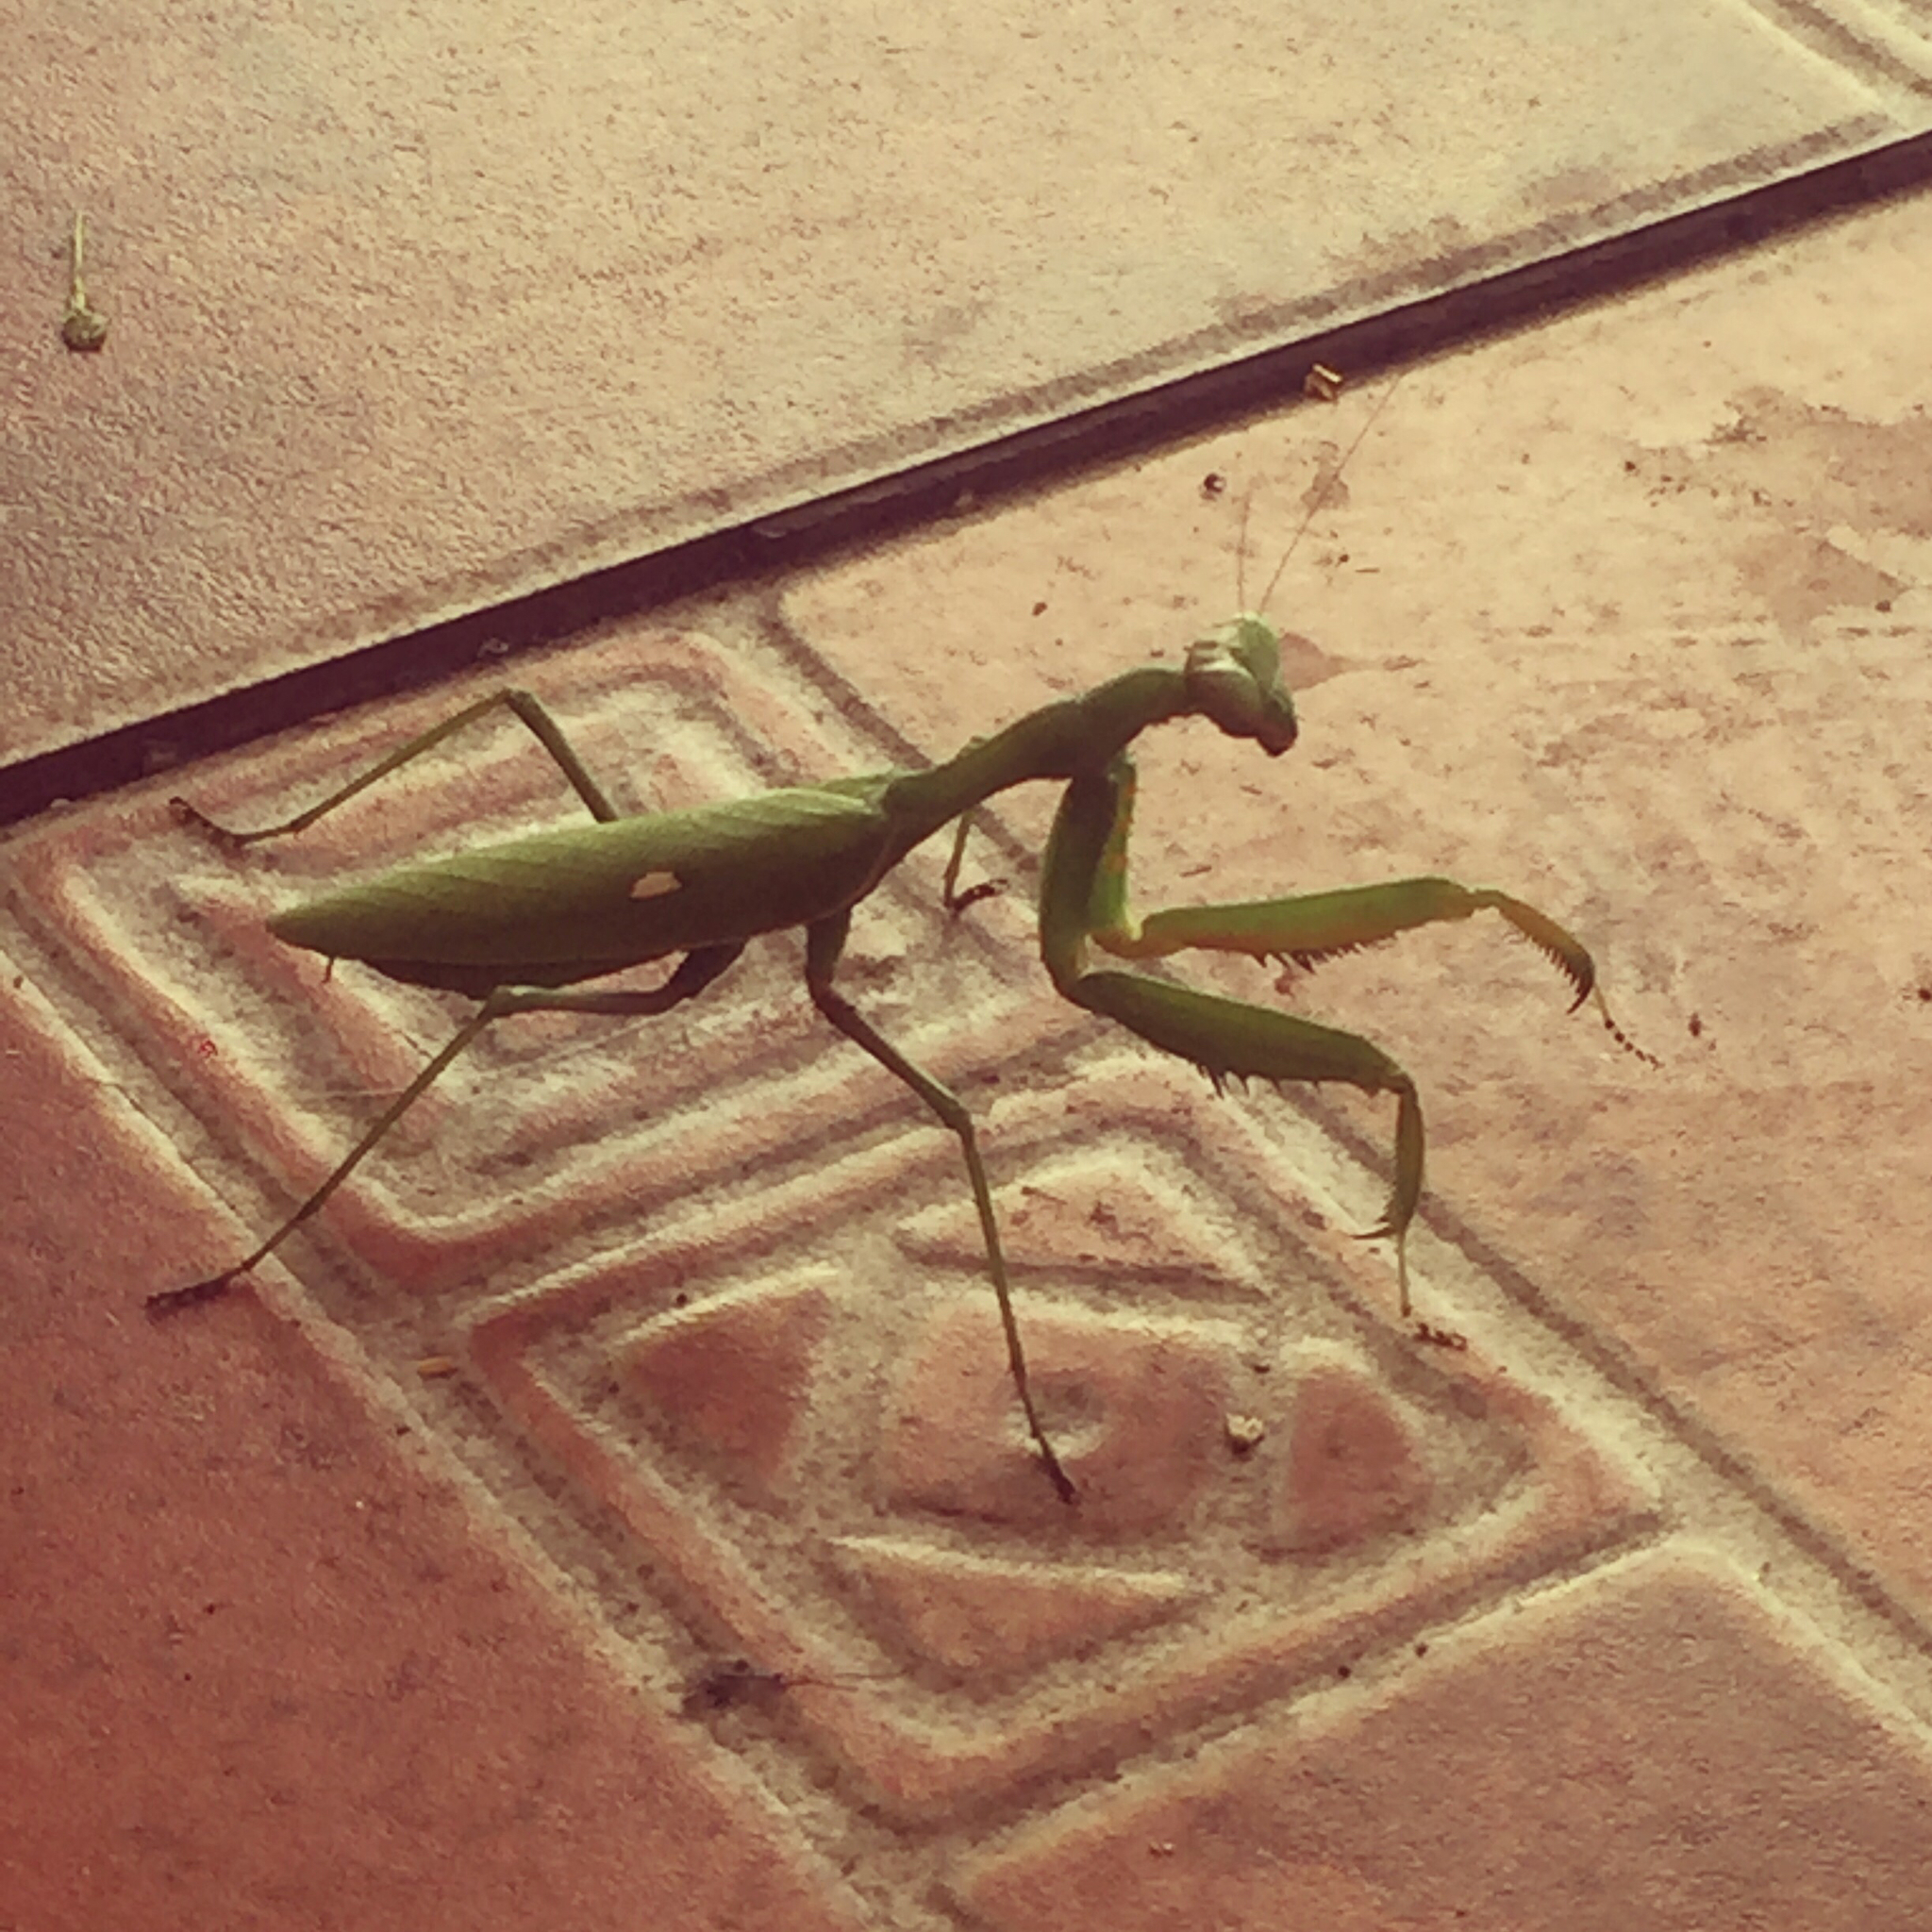 Domestic Animals - My, Animals, Mantis, Spain, Help, Nature, Insects